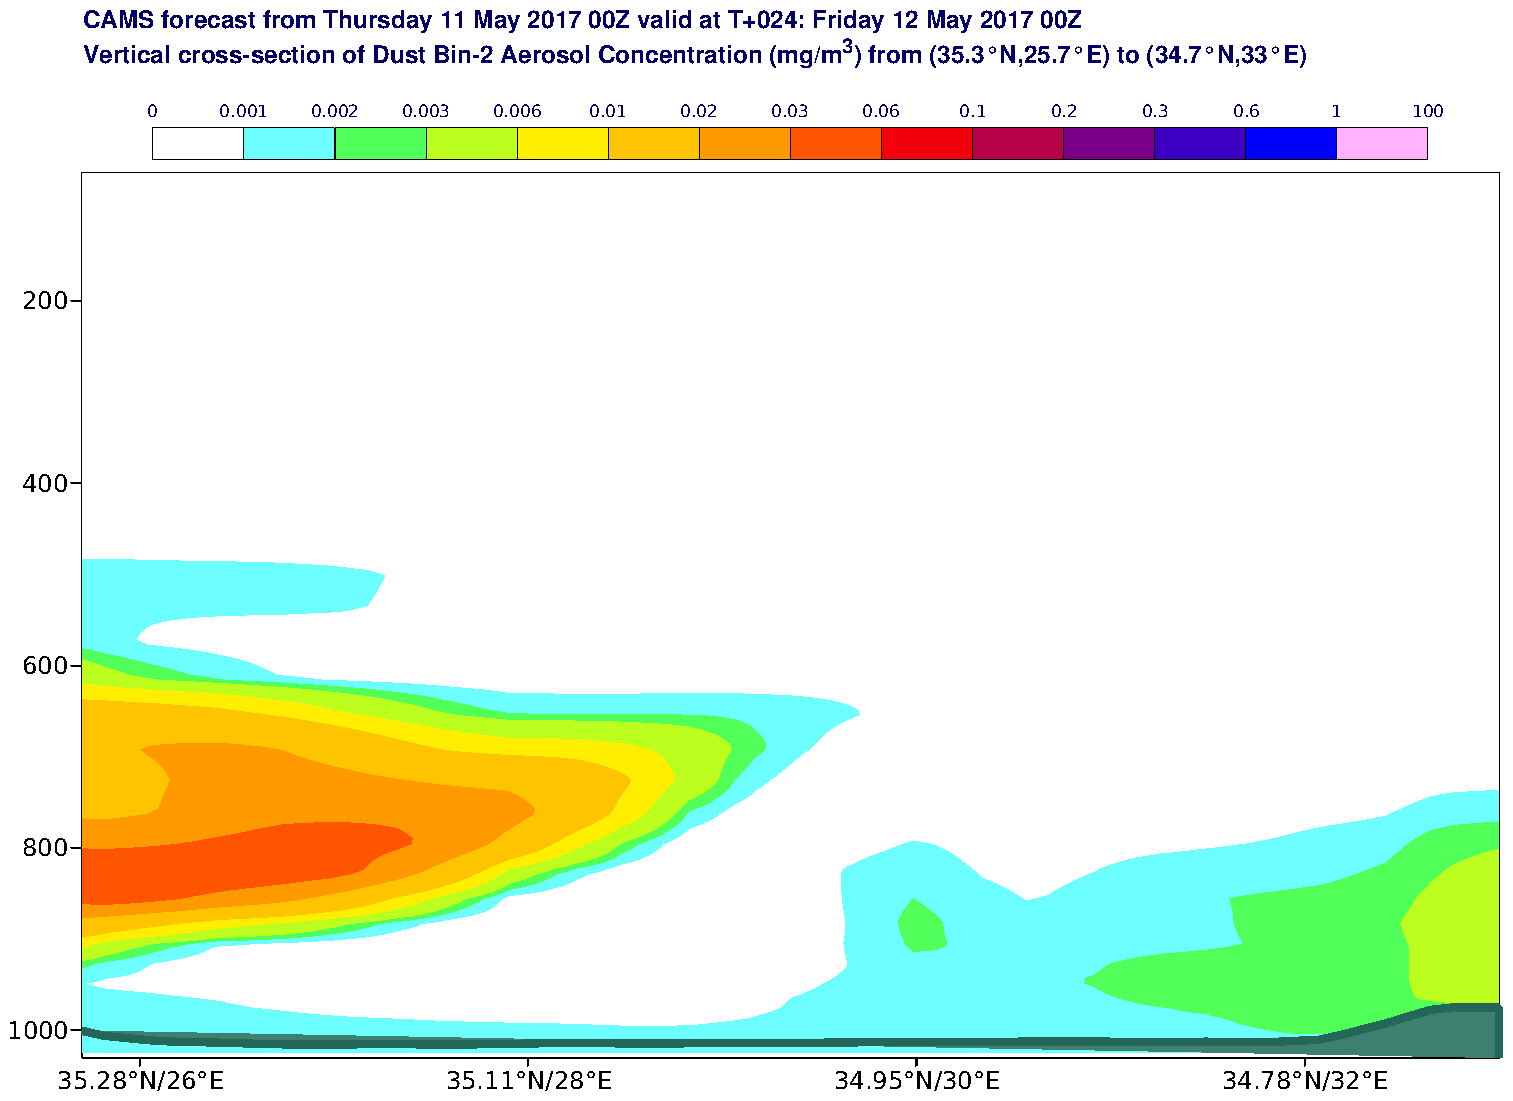 Vertical cross-section of Dust Bin-2 Aerosol Concentration (mg/m3) valid at T24 - 2017-05-12 00:00